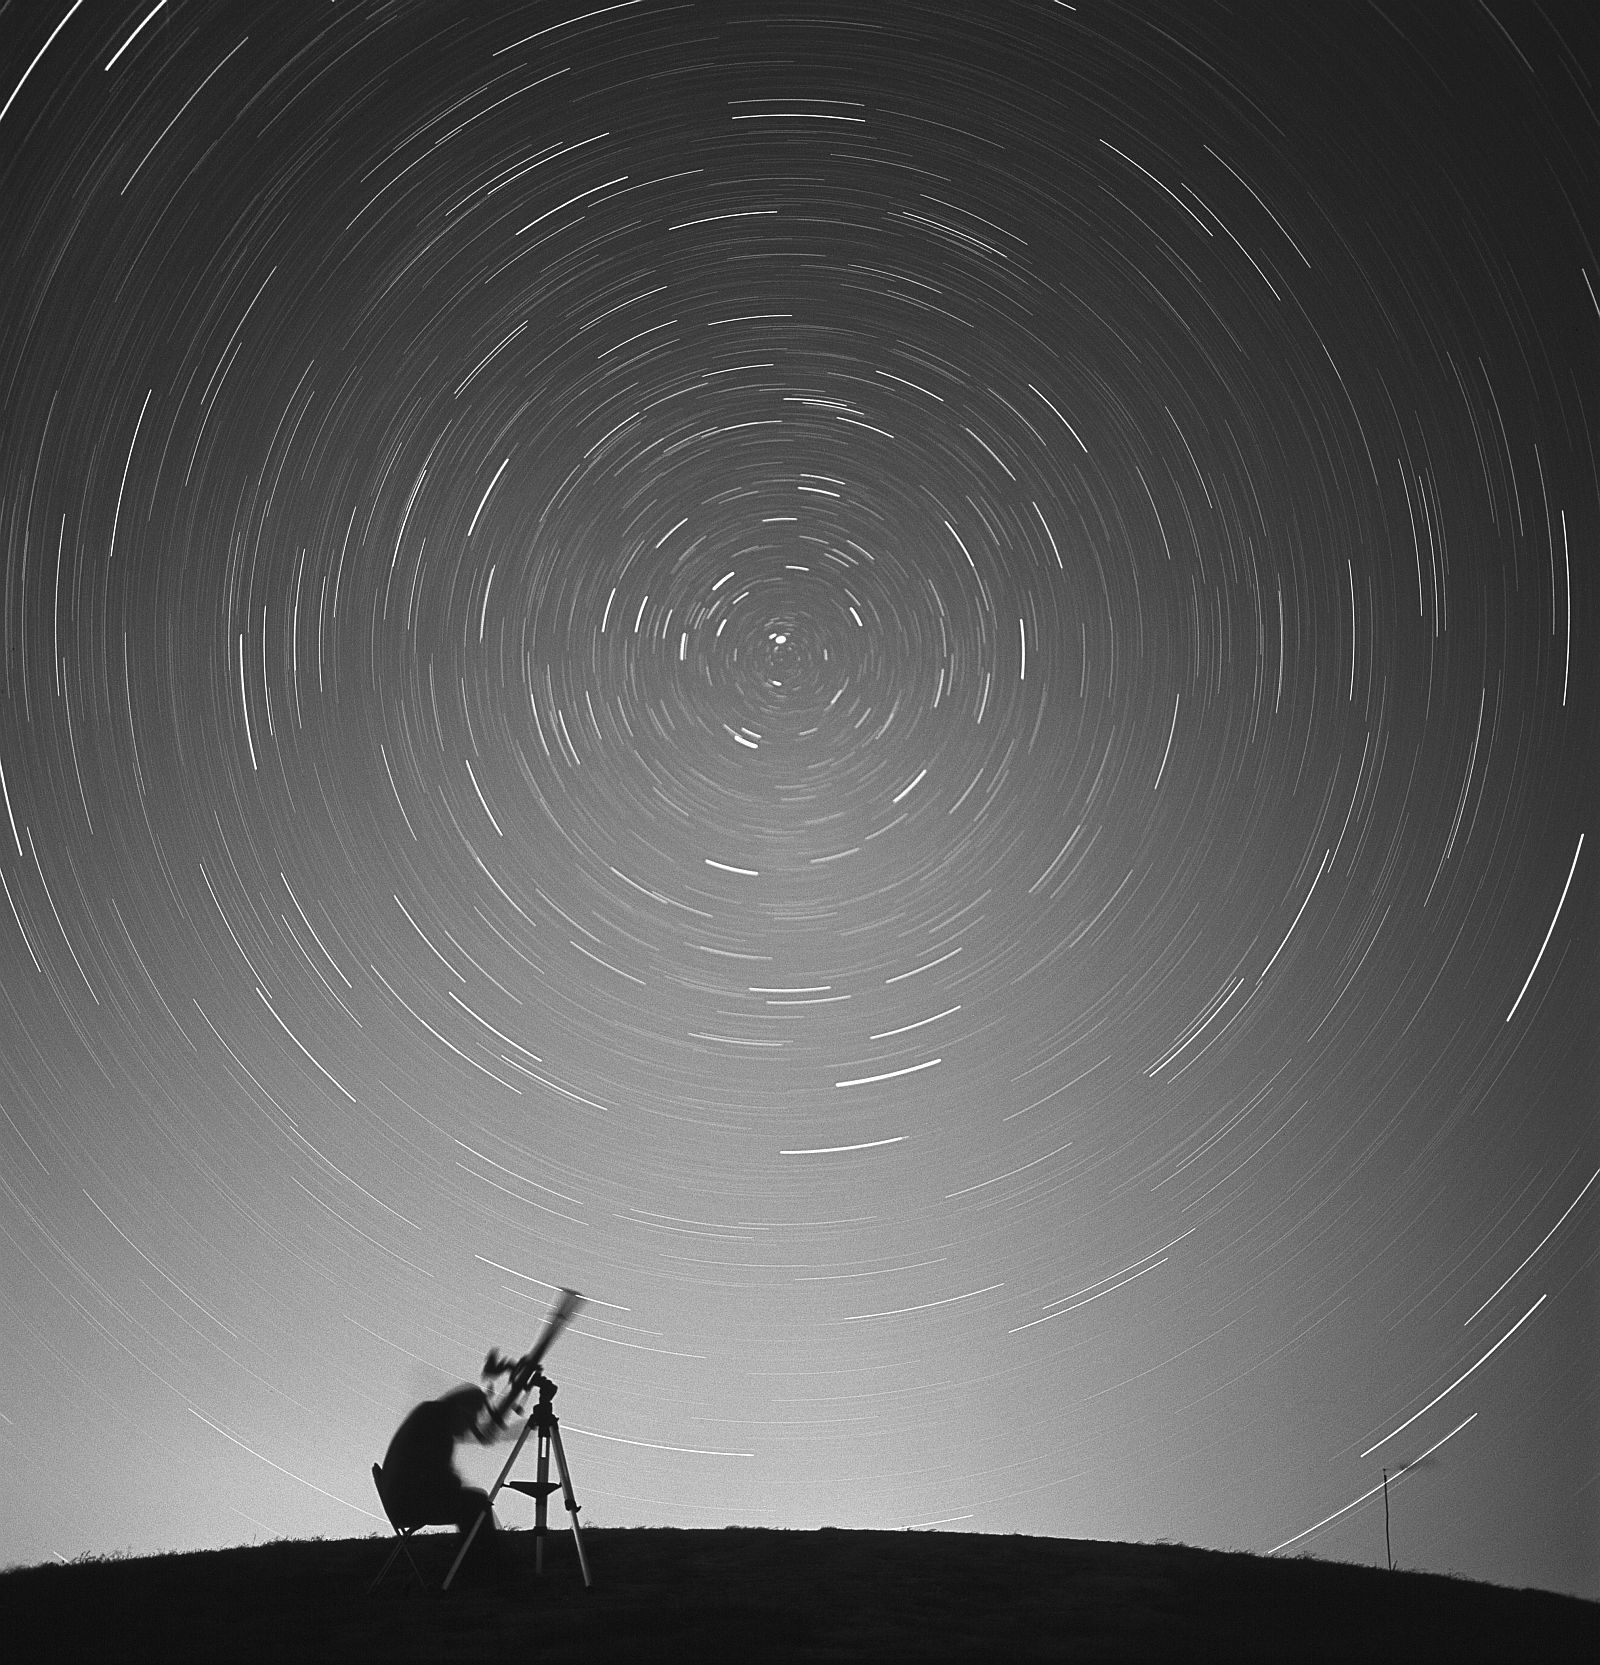 Jisoo Kang - Star Dust - 1st place in SPECIAL LONG EXPOSURE - 1